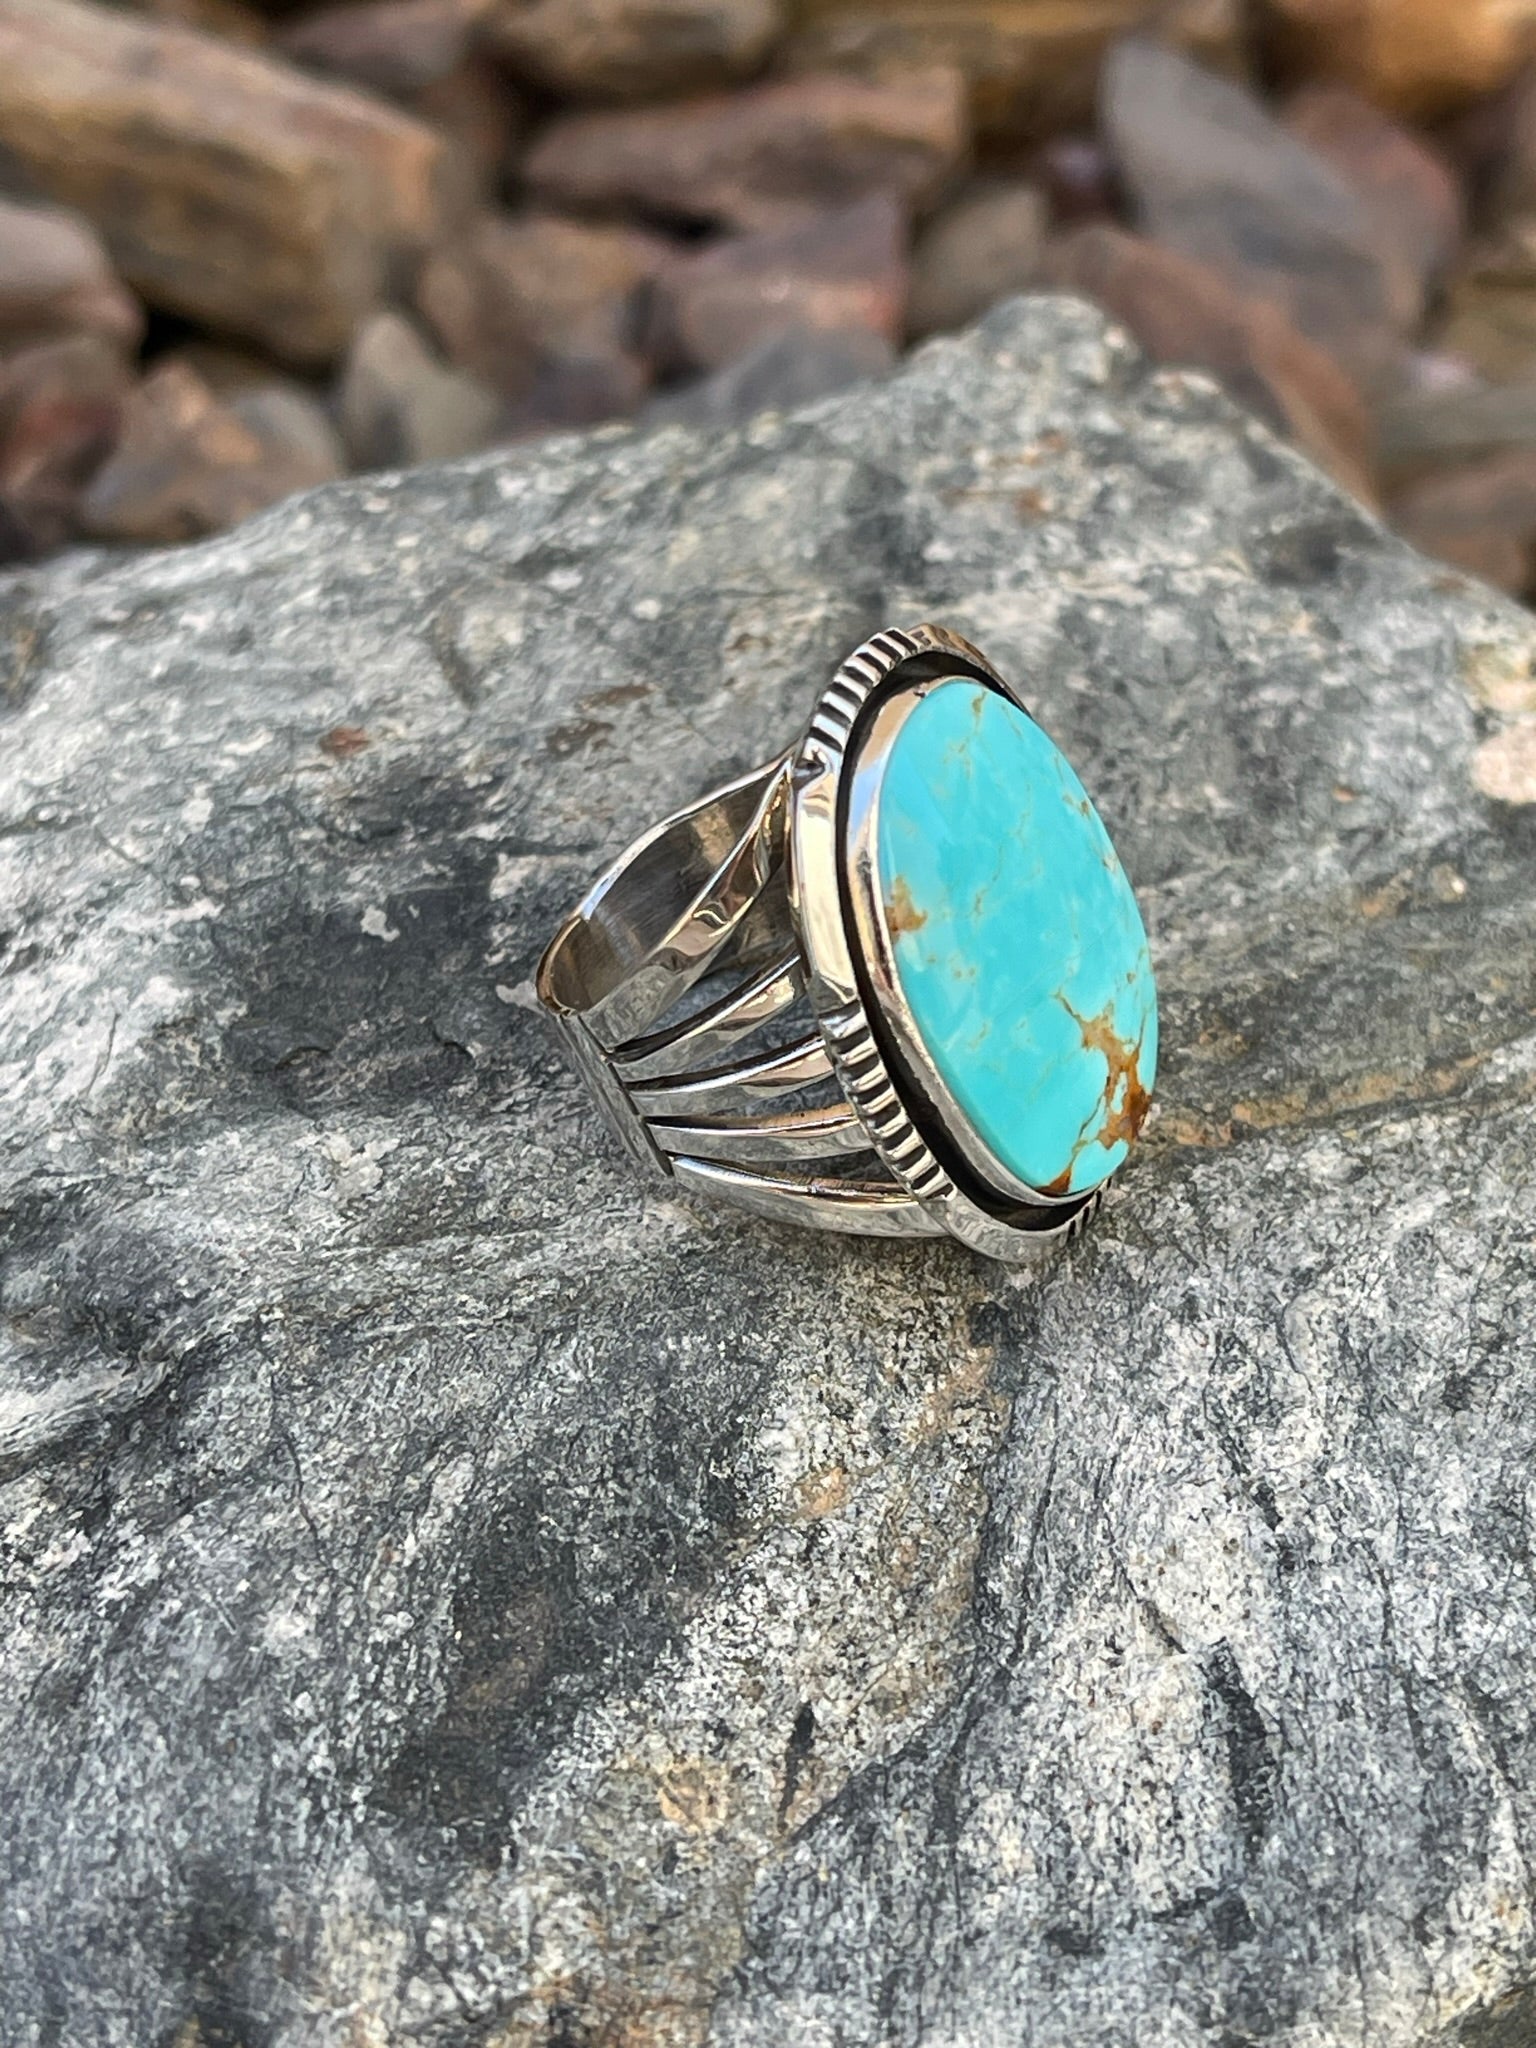 Signature Hand Crafted Sterling Silver Kingman Turquoise Five Prong Ring - Size 8 1/2